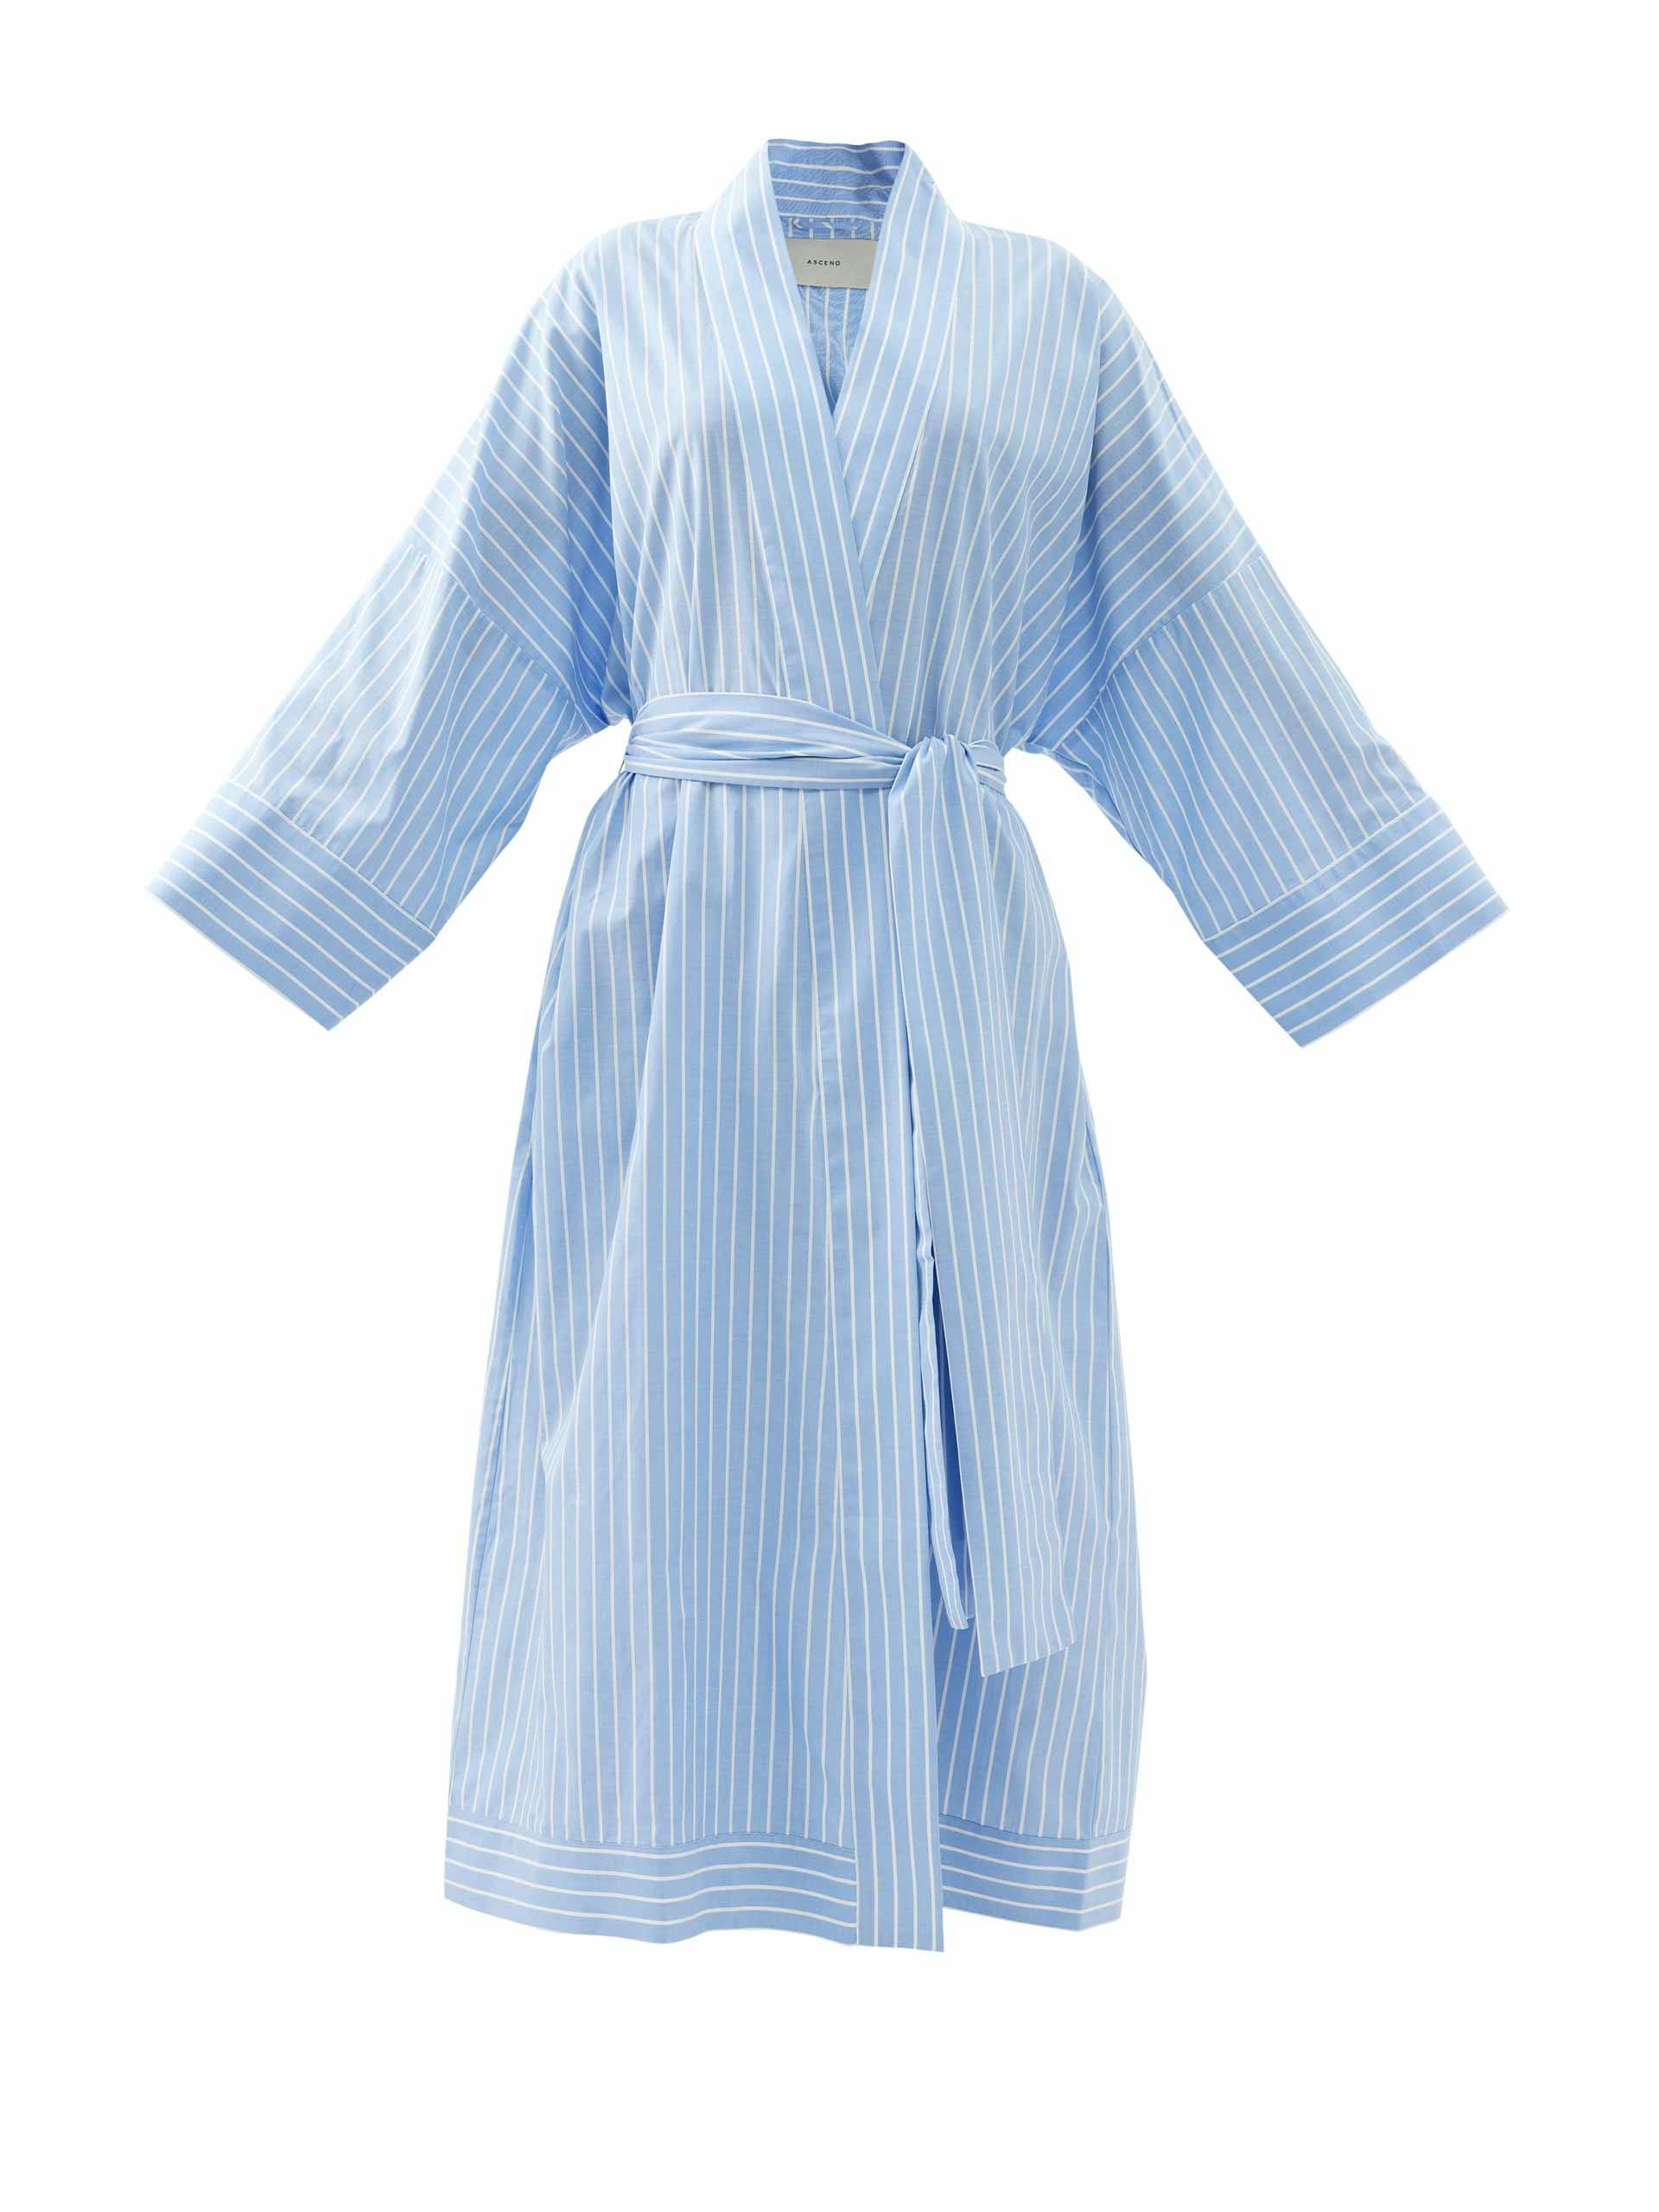 Blue and white striped dressing gown